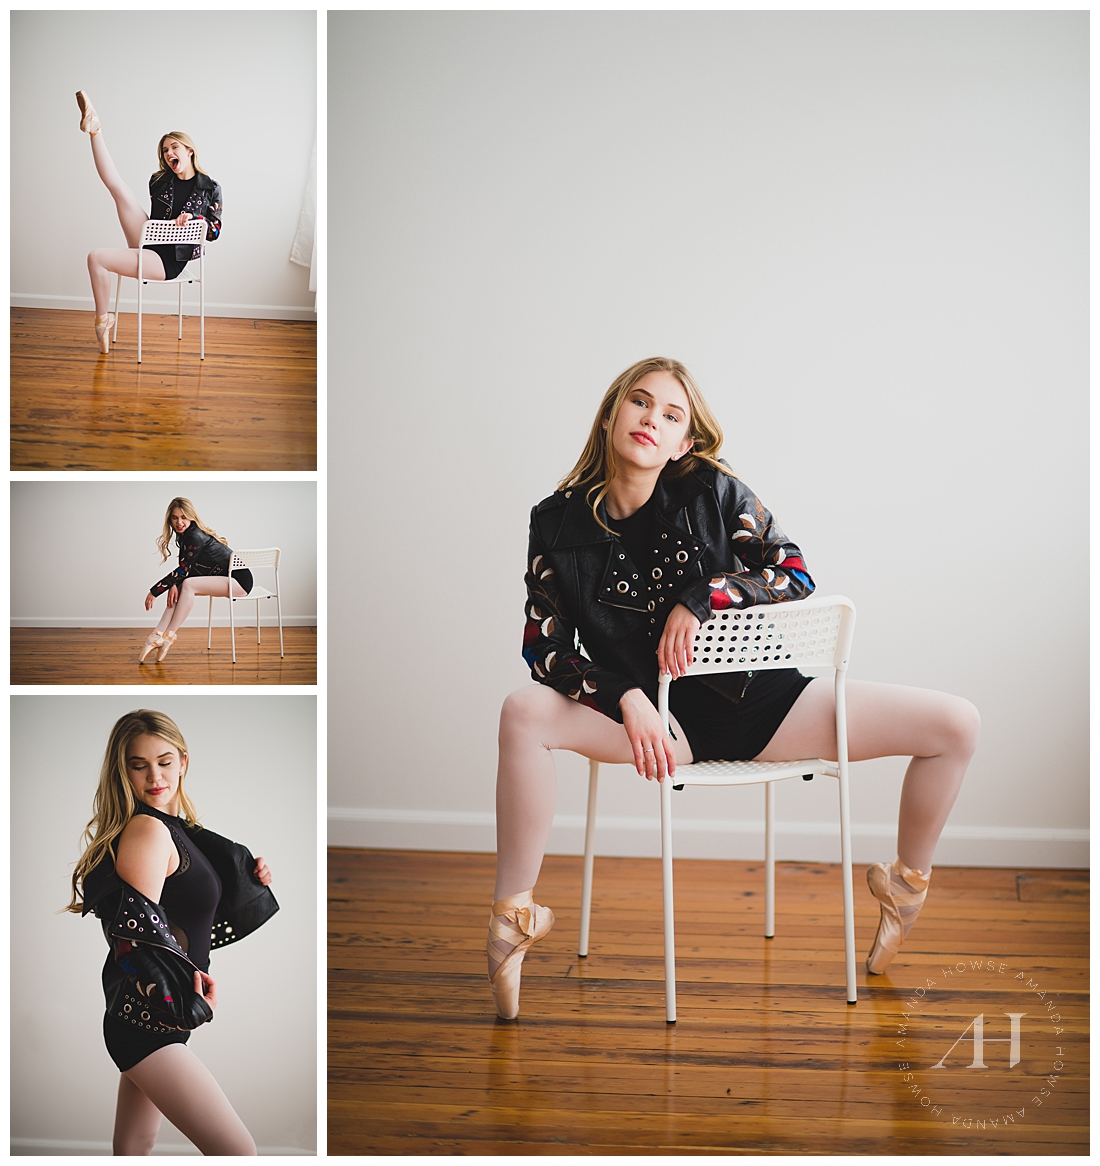 Edgy Ballerina Photos at Modern Studio in Tacoma | Pose Ideas for Dancers | Ballerina Portrait Sessions Photographed by Tacoma Senior Photographer Amanda Howse